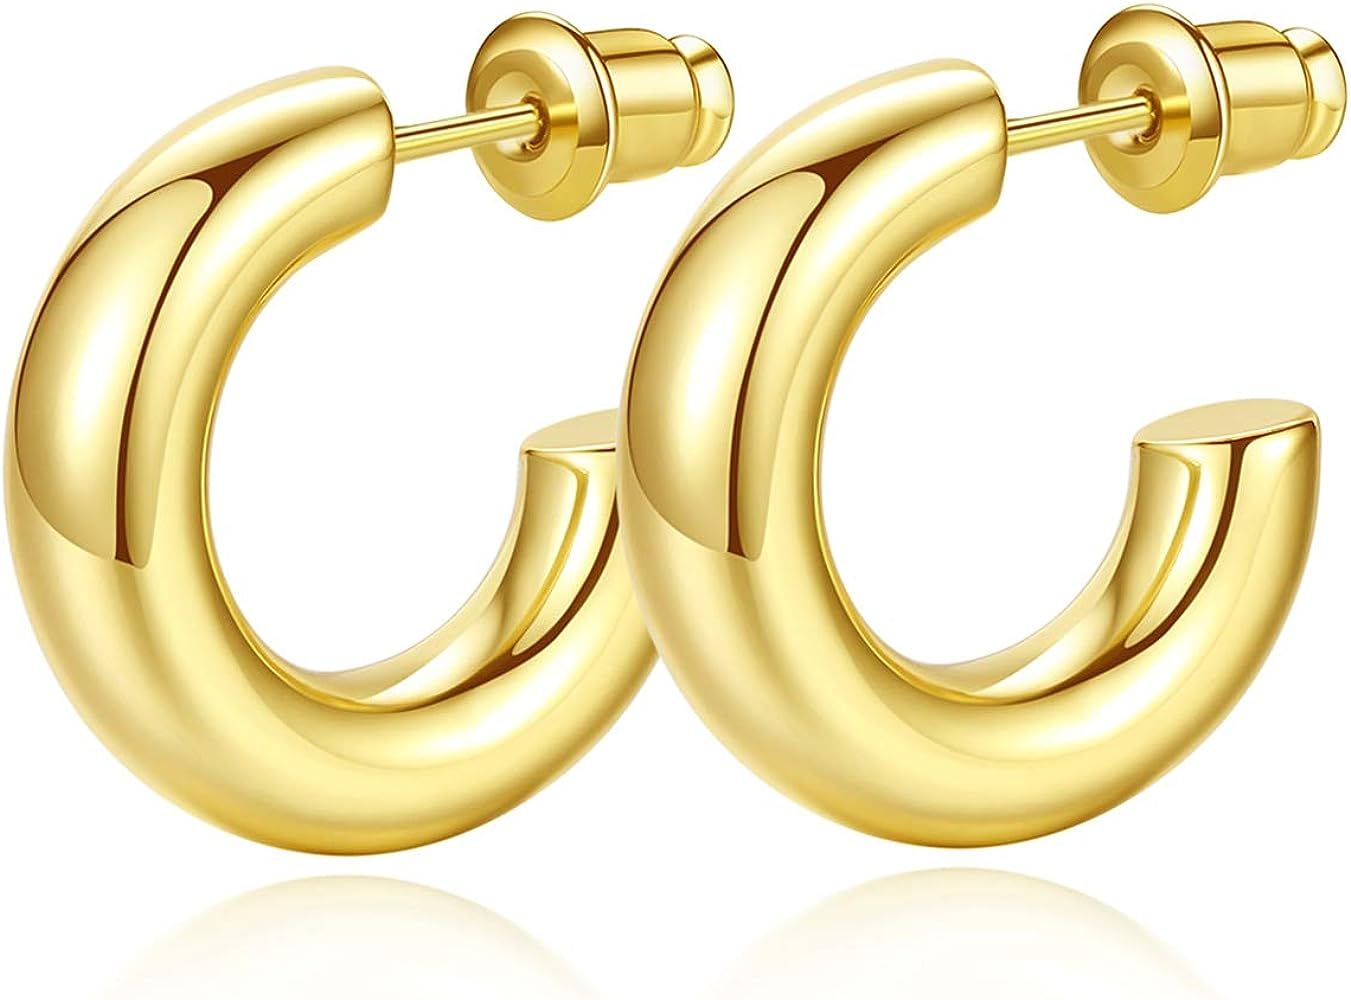 Howoo 14K Gold Plated Chunky Gold Hoops High Polished Gold Hoop Earrings for Women | Amazon (US)